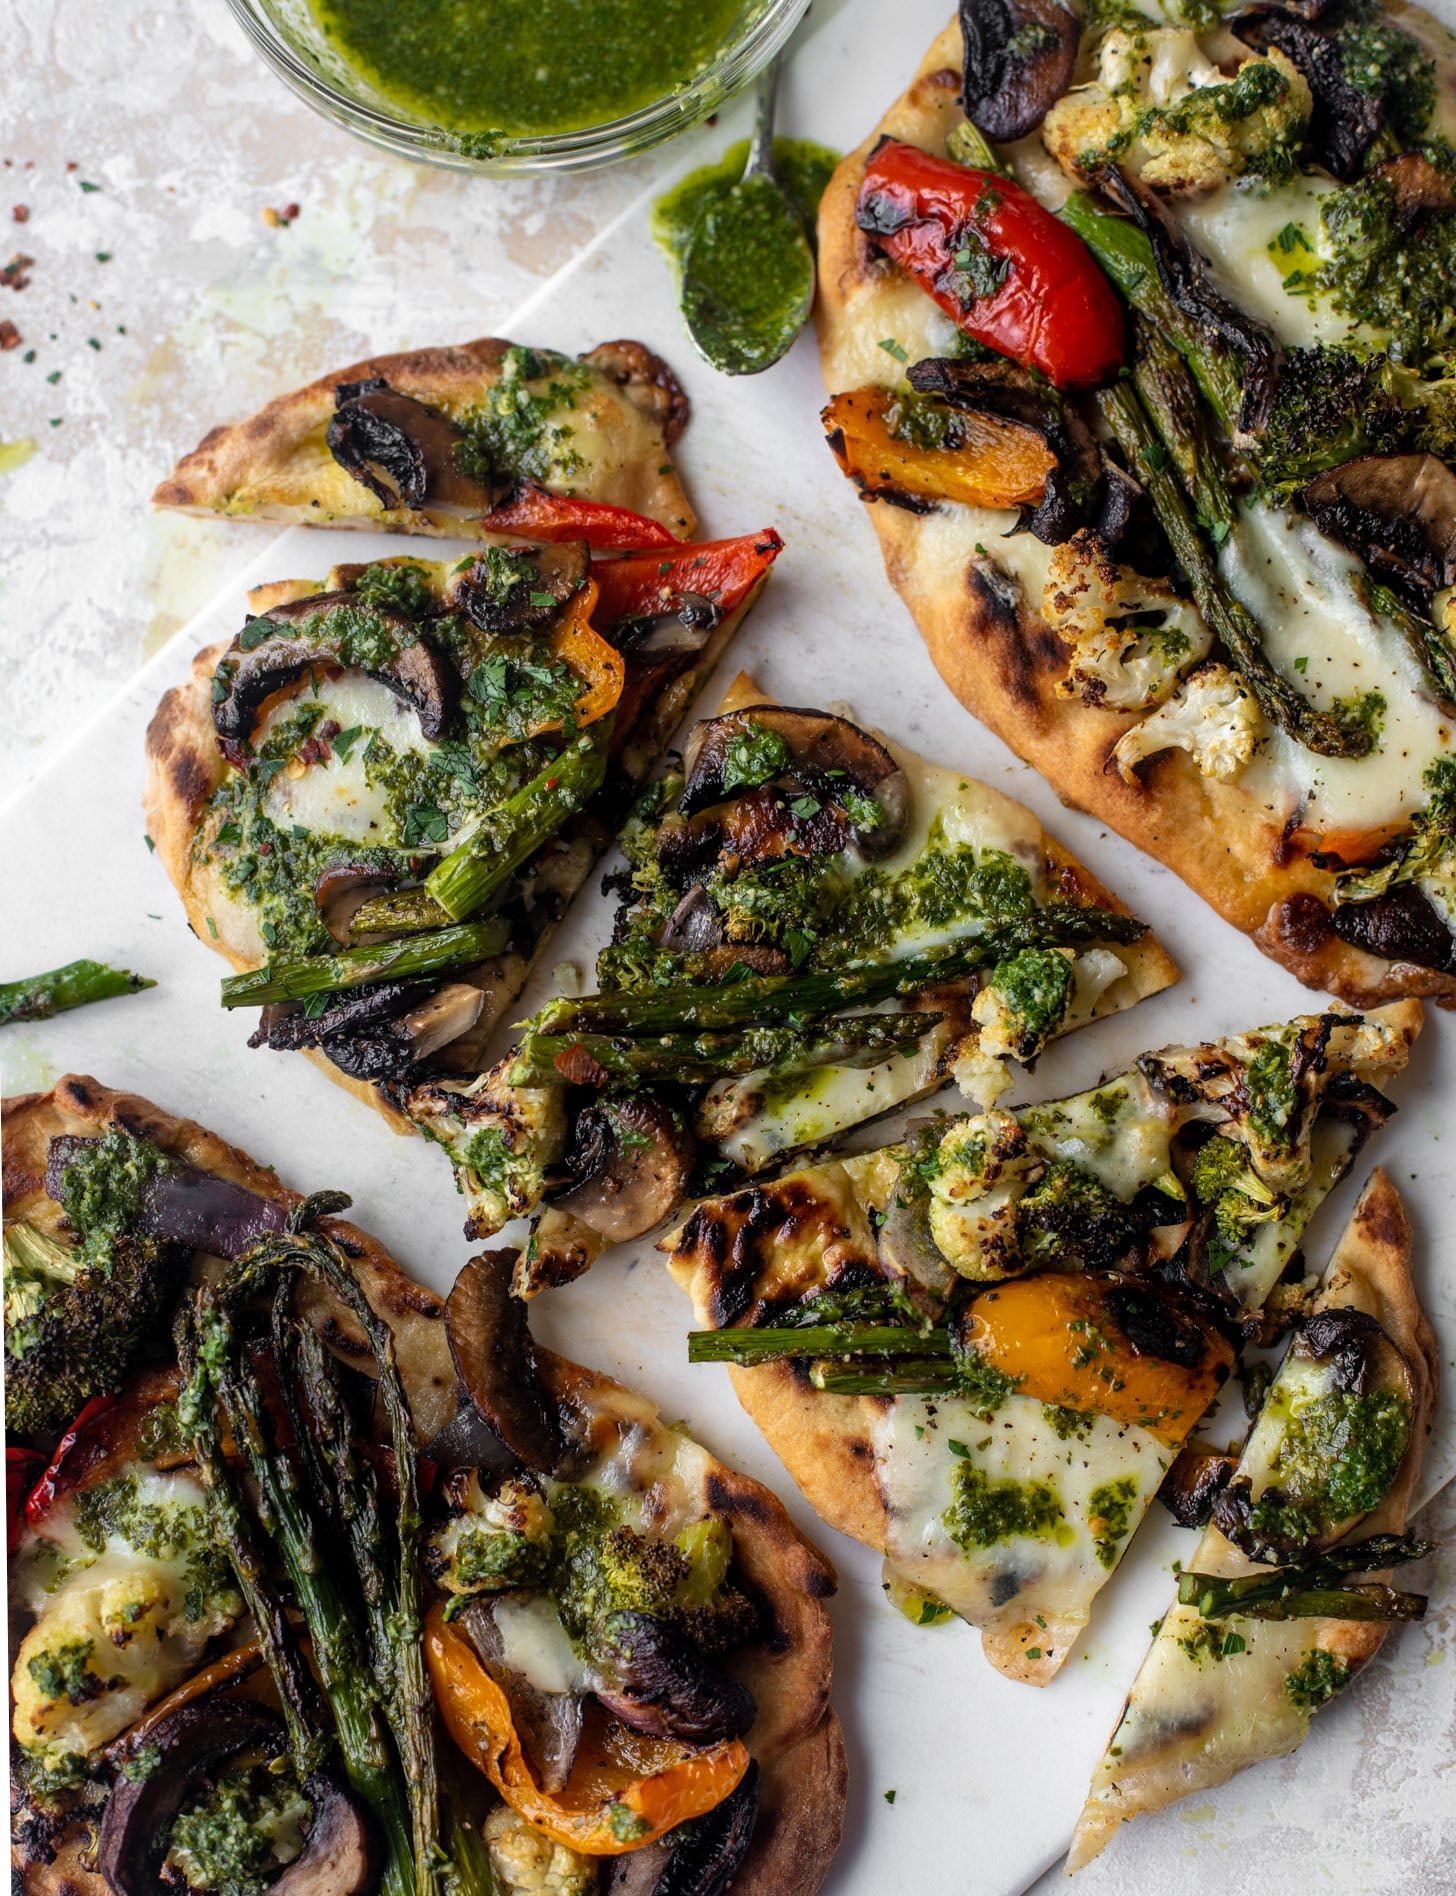 Grilled vegetable naan pizza with chimichurri sauce recipe